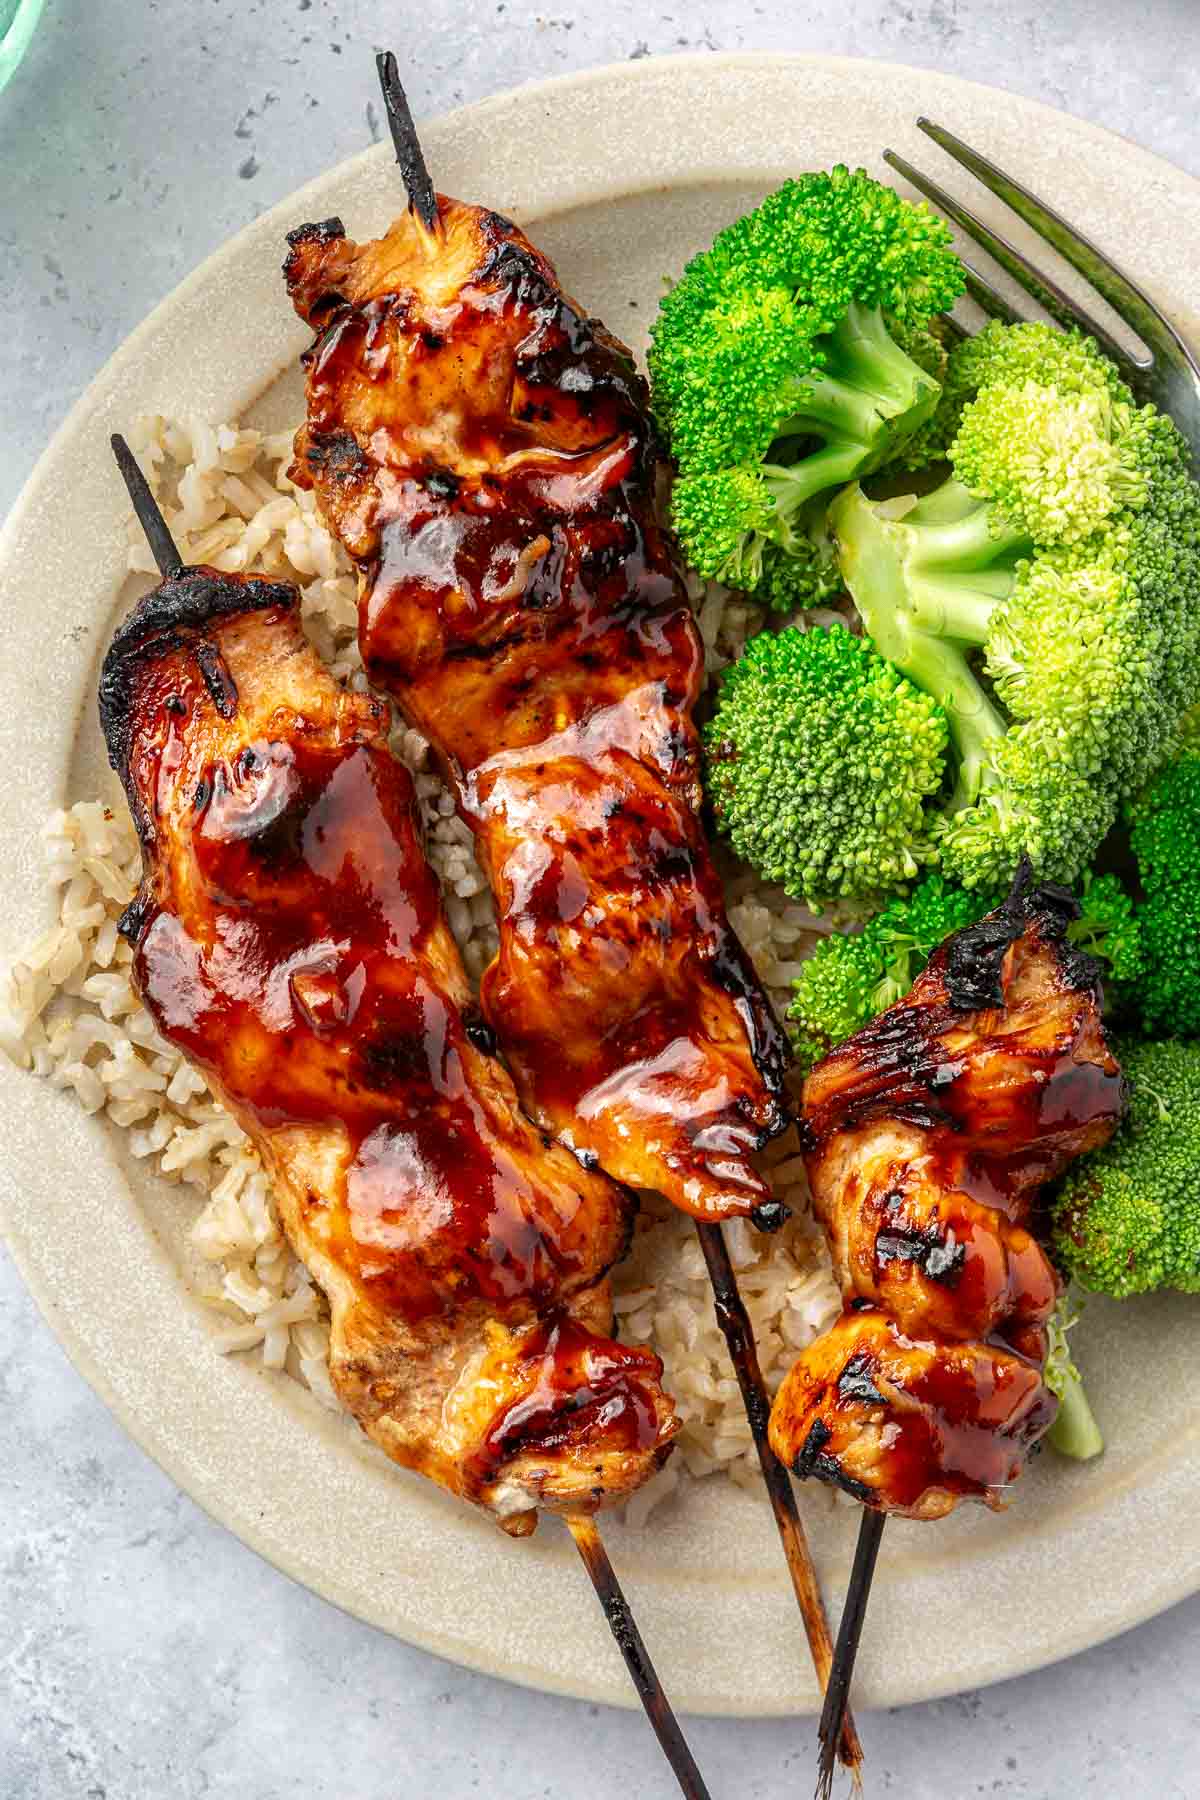 Grilled chicken on wooden kabobs served with rice and broccoli.